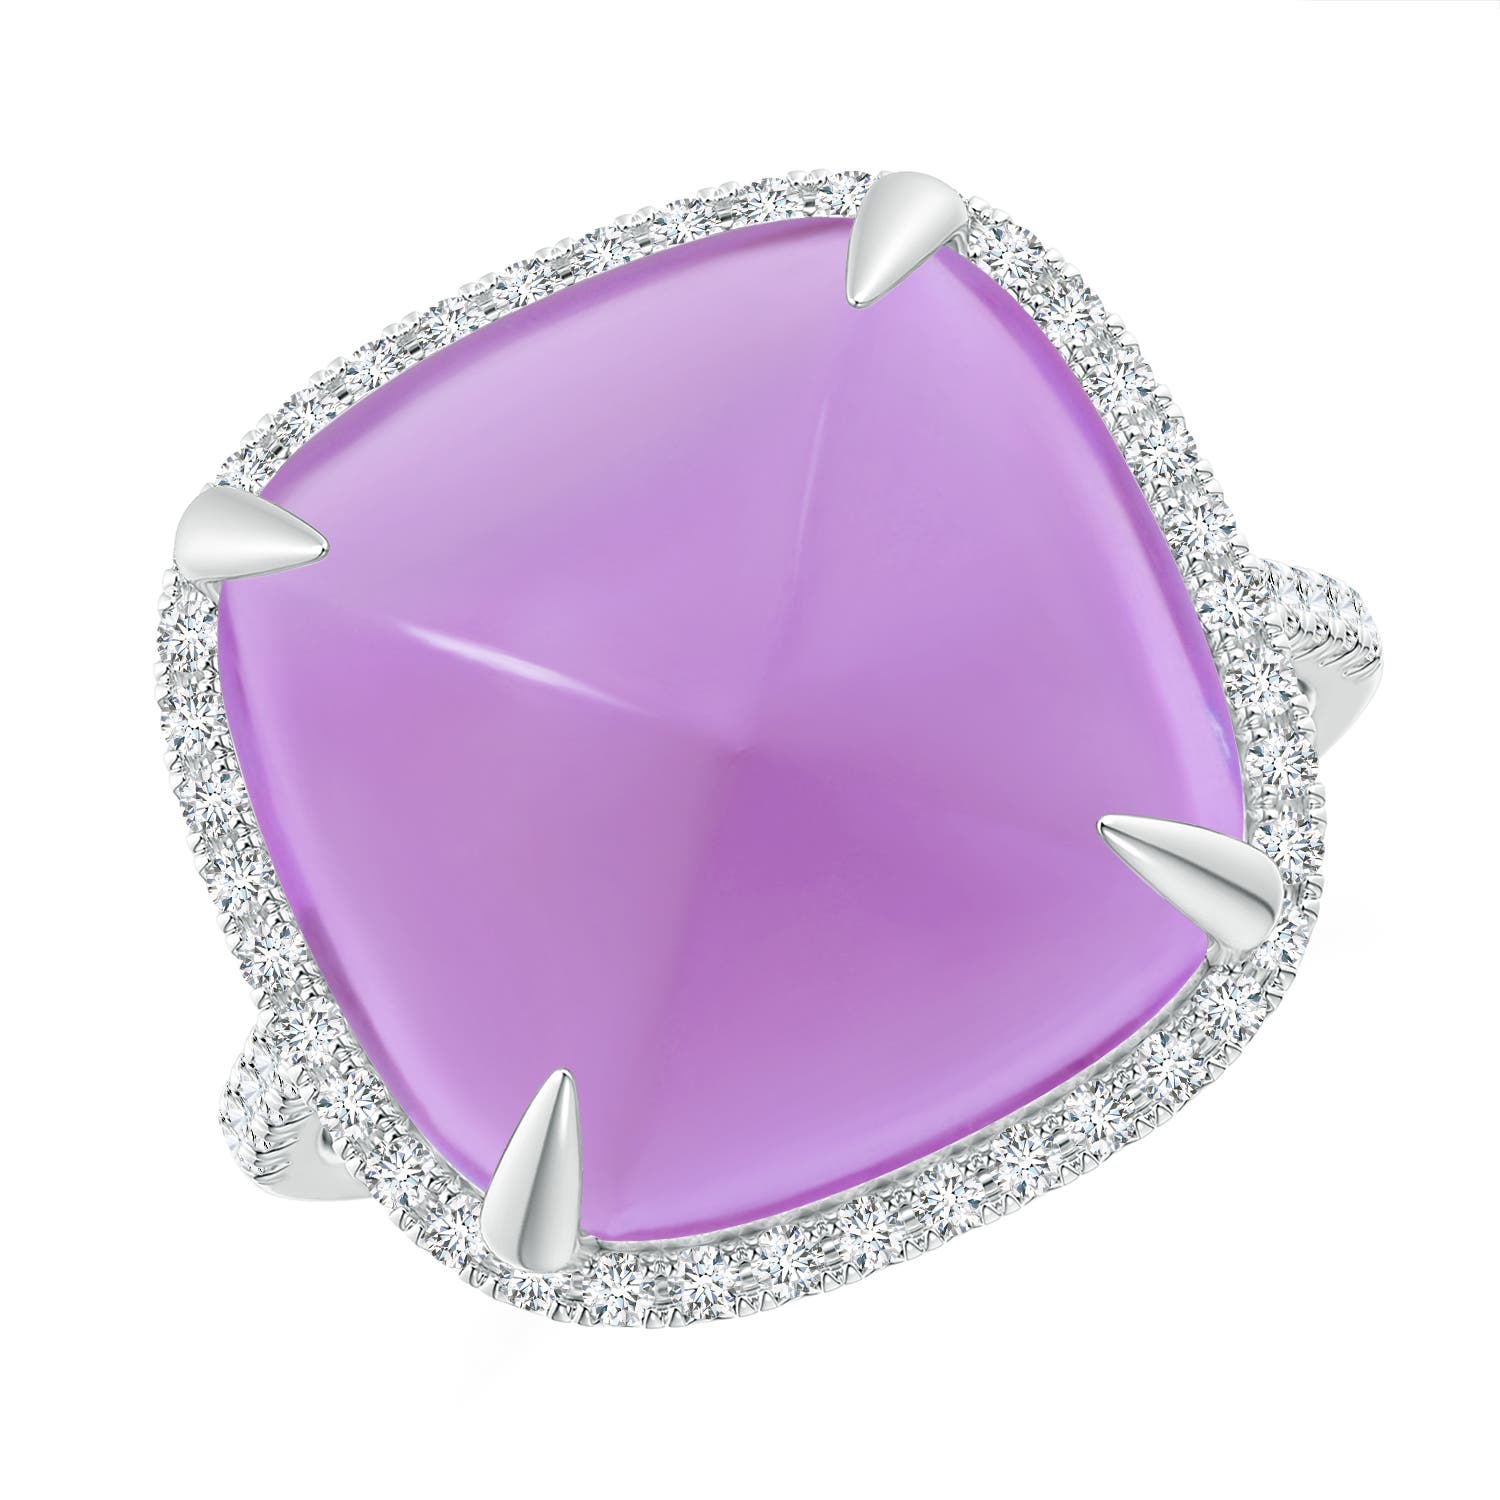 A - Amethyst / 12.91 CT / 14 KT White Gold